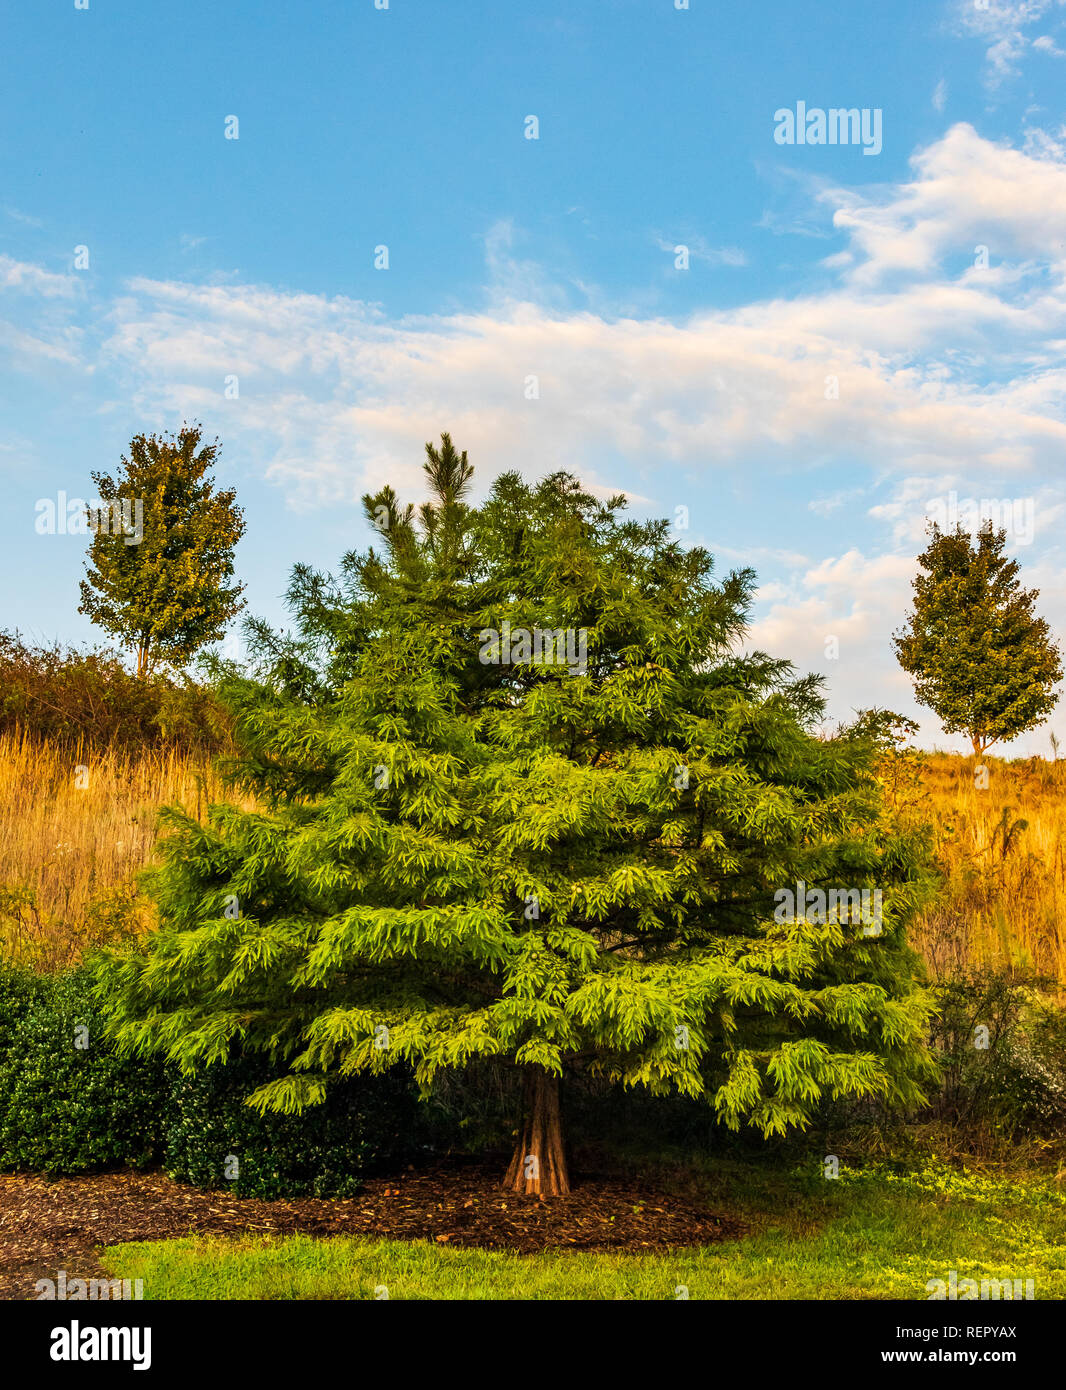 Ornamental trees with golden grassy hill and blue sky. Stock Photo